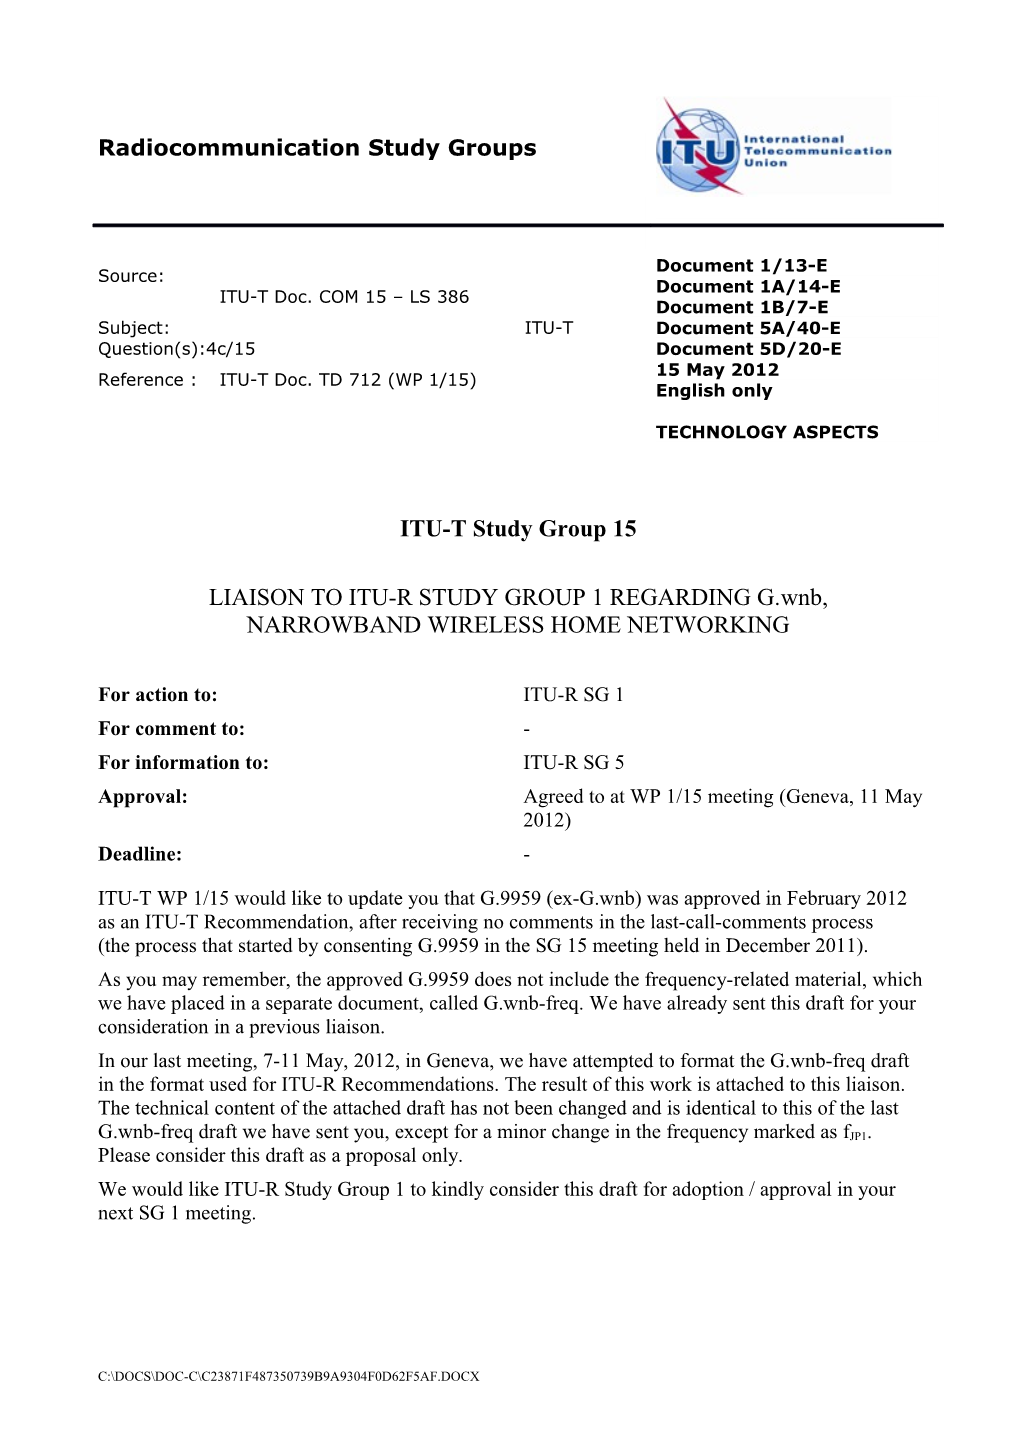 ITU-T WP 1/15 Would Like to Update You That G.9959 (Ex-G.Wnb) Was Approved in February